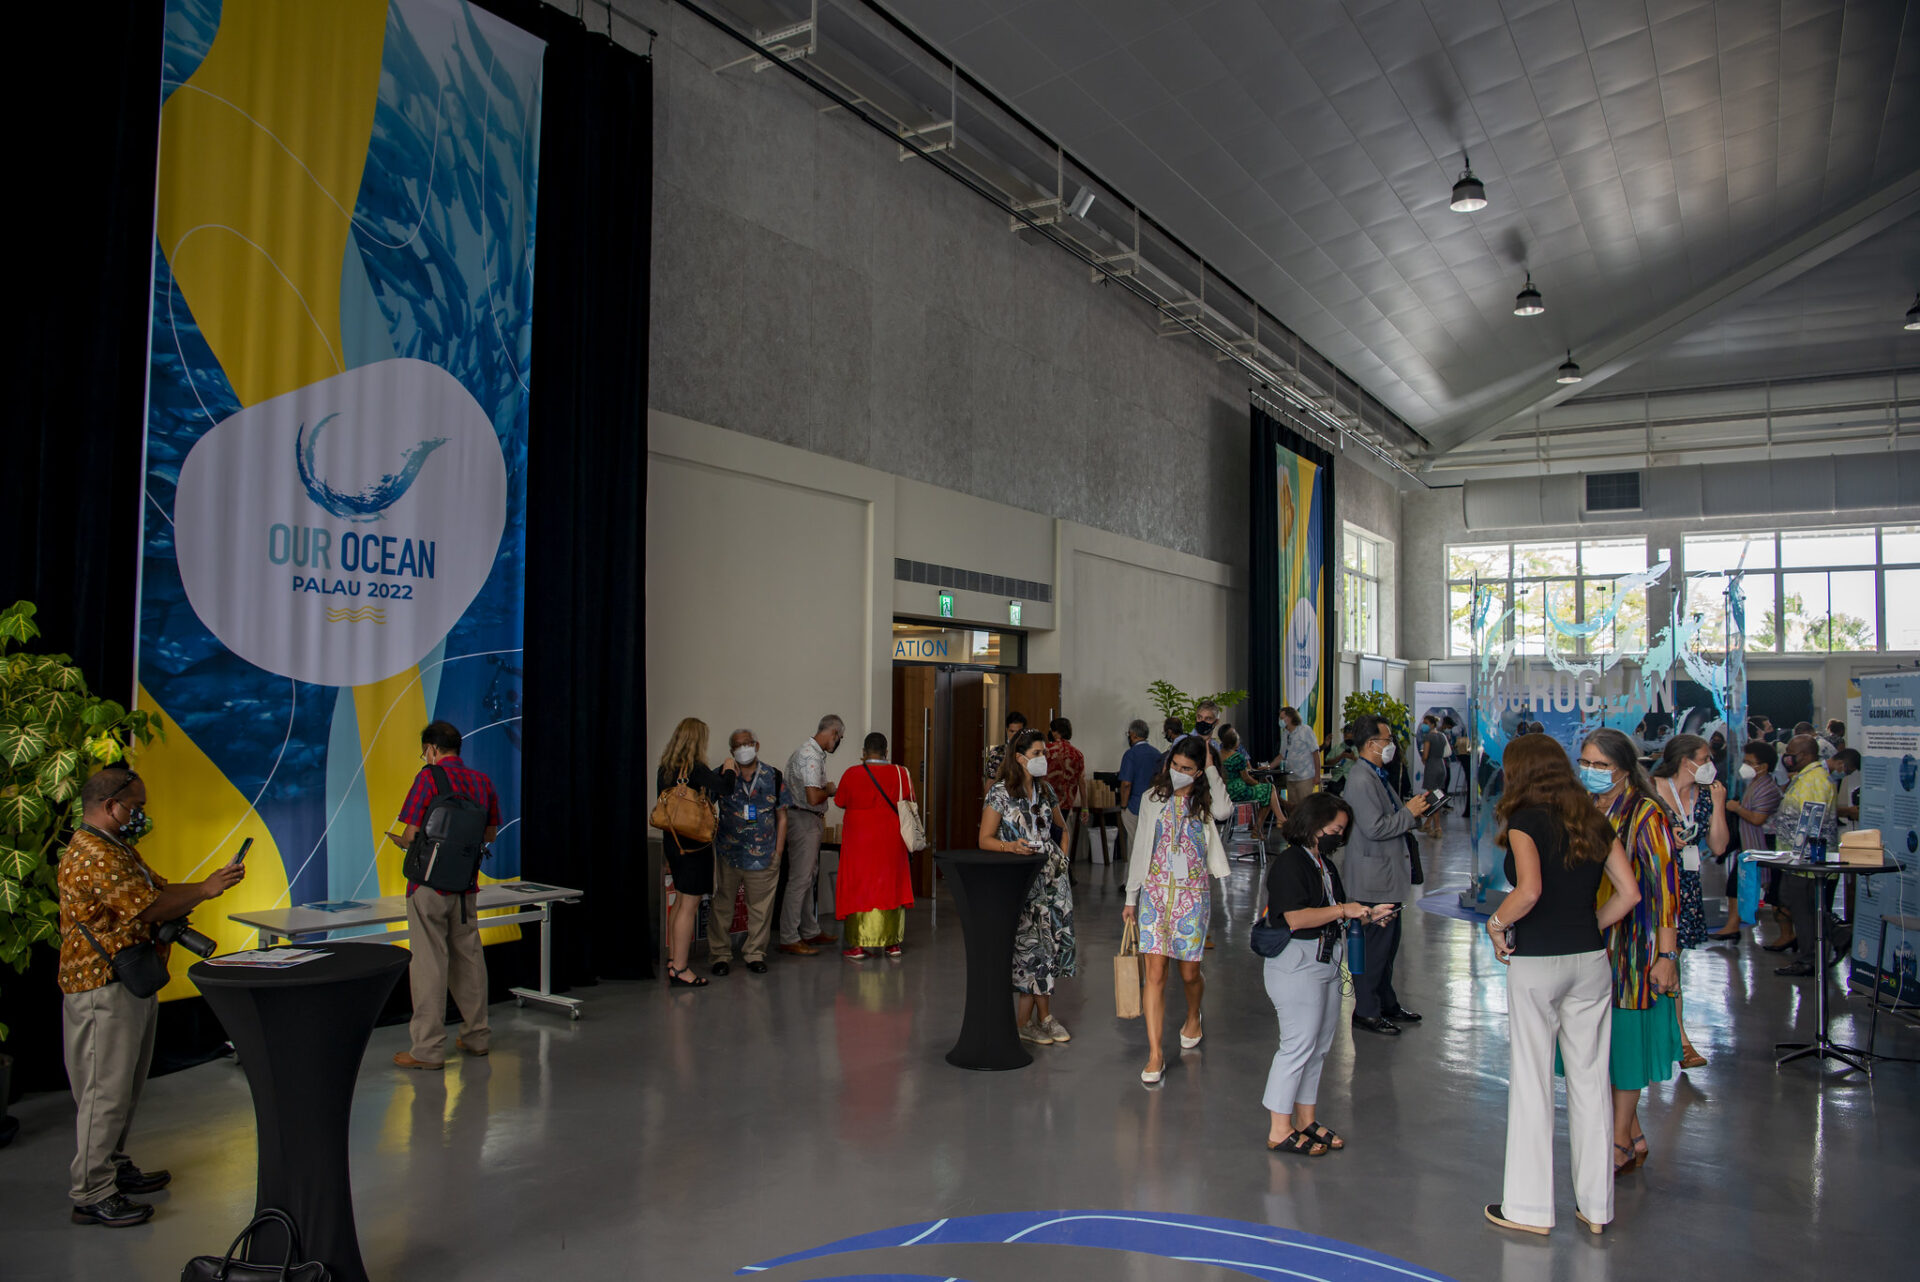  Participants and Delegates at the 7th Our Ocean Conference, hosted by Palau and the United States, On April 14, 2022 in Koror, Palau (Jesse Alpert/U.S. Department of State)